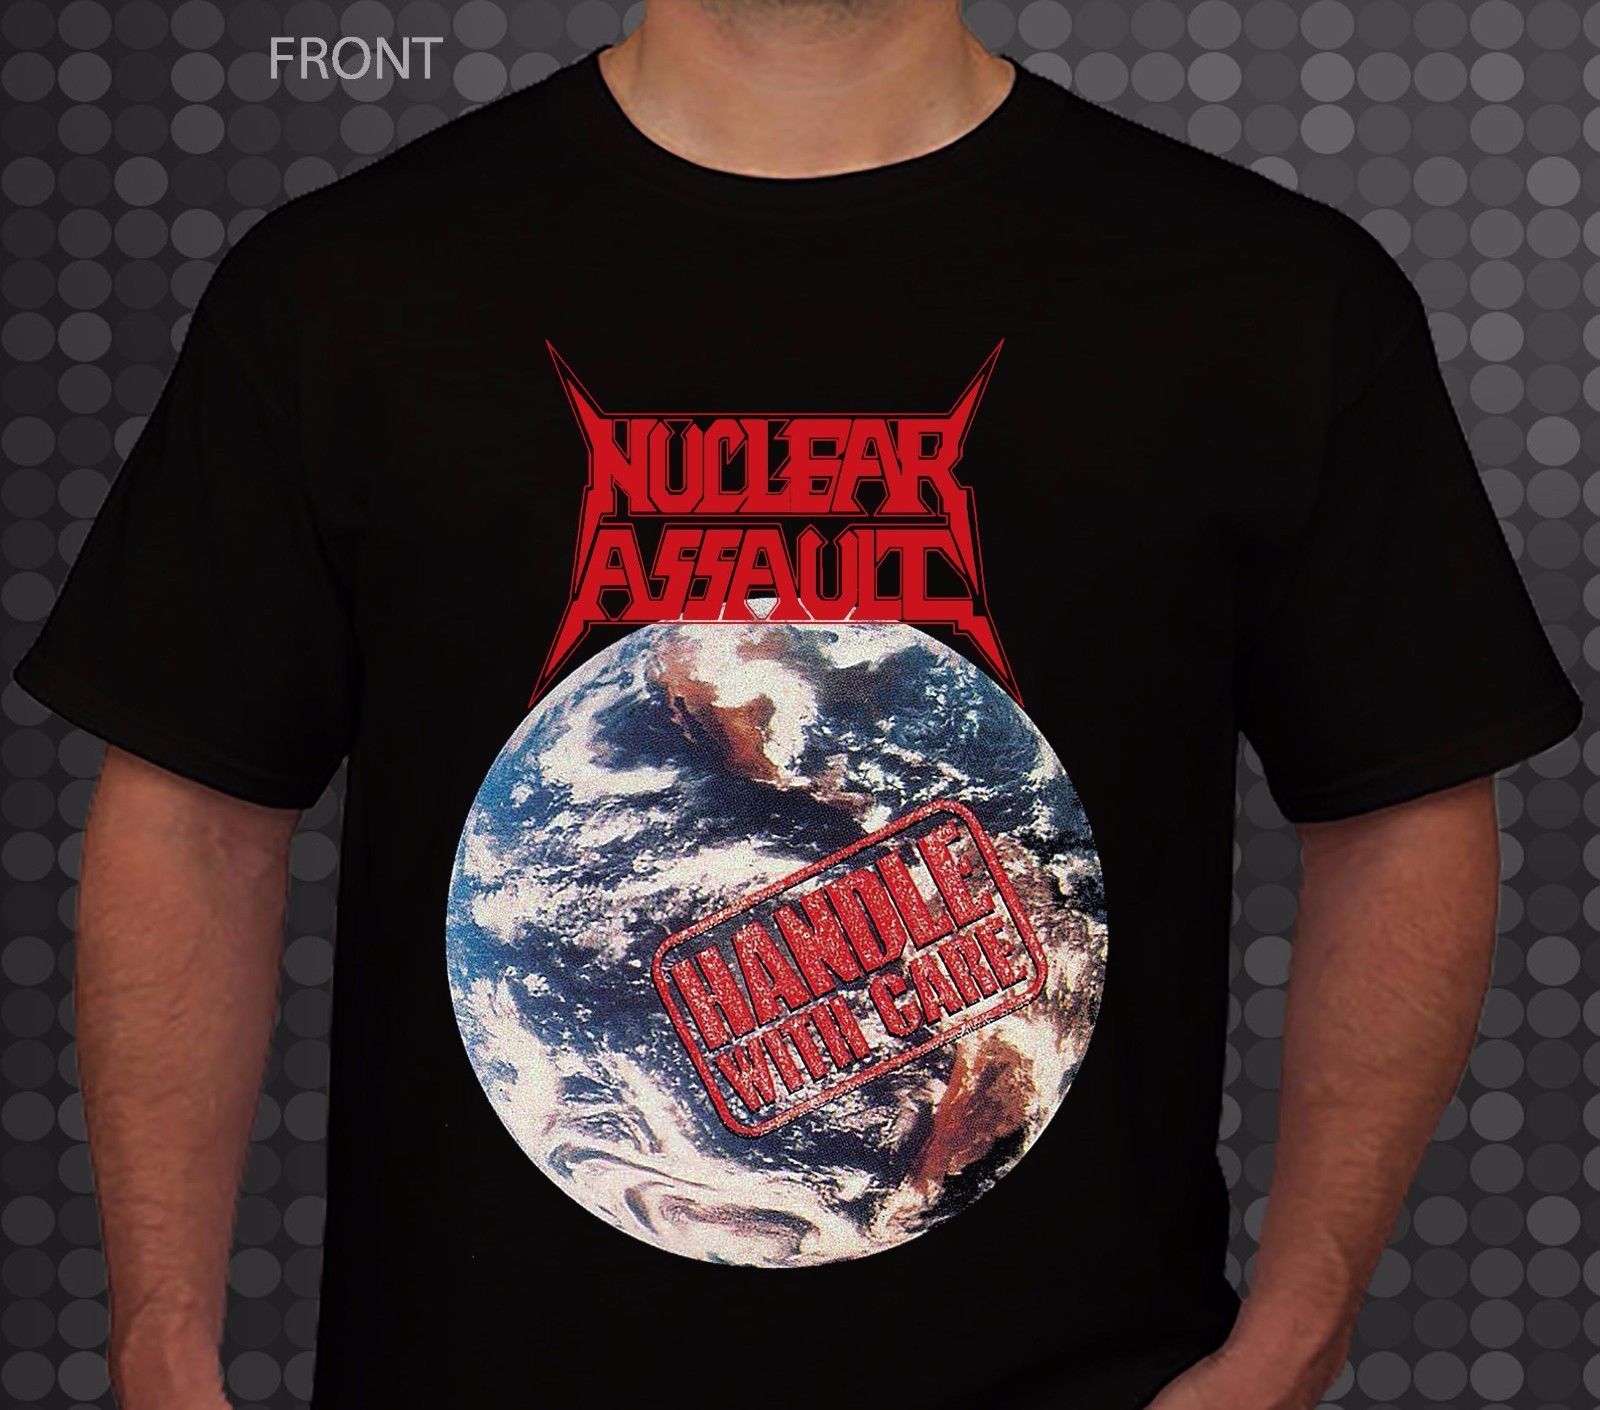 Nuclear Assault - Handle with Care - American Thrash Metal Band T